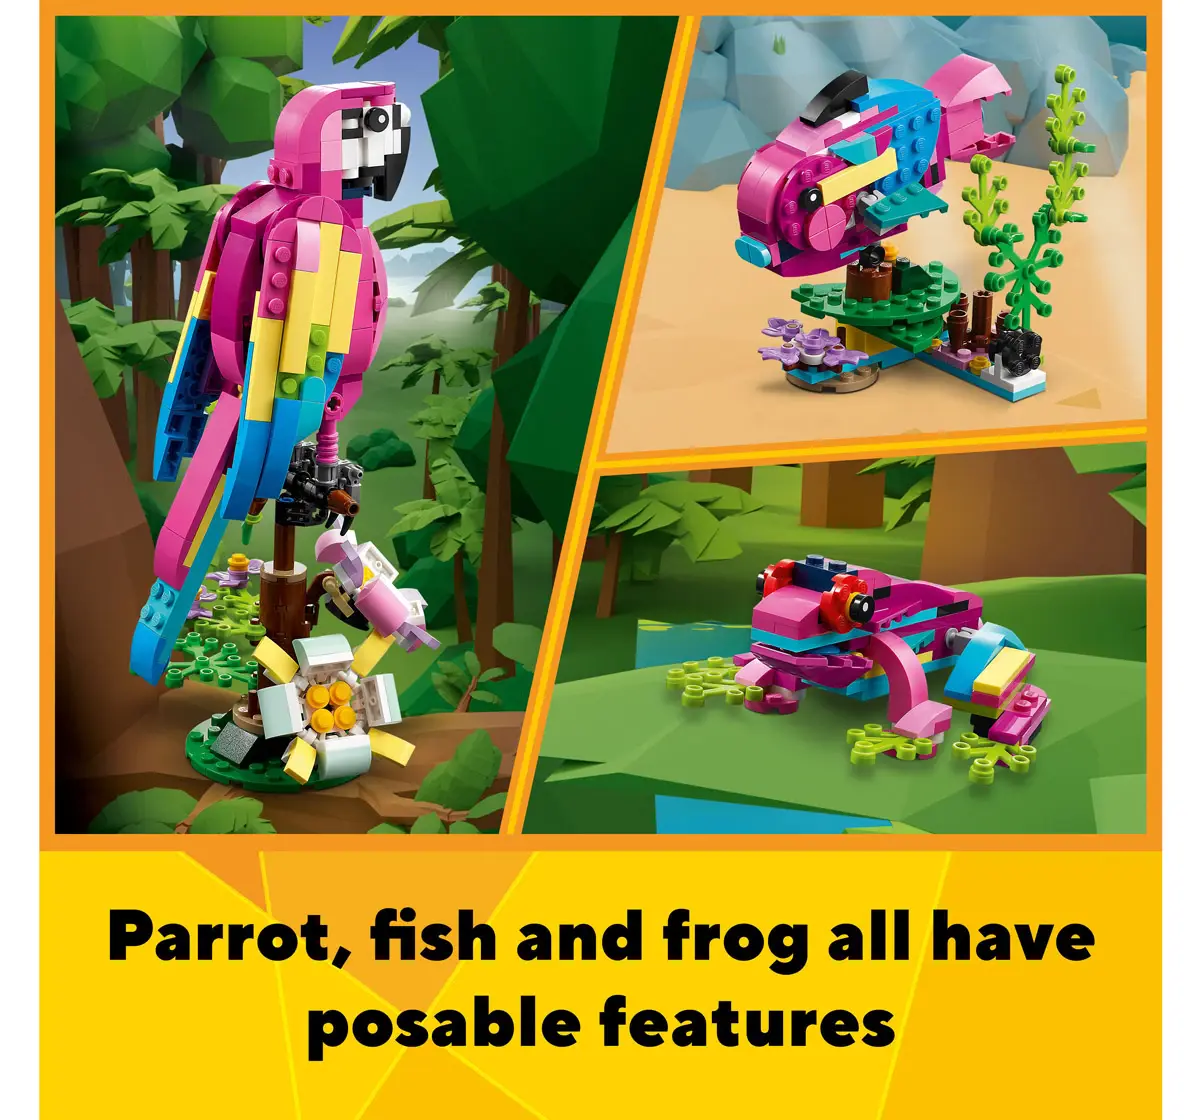 Lego Creator Exotic Pink Parrot 31144 Building Toy Set Multicolour For Kids Ages 7Y+ (253 Pieces)